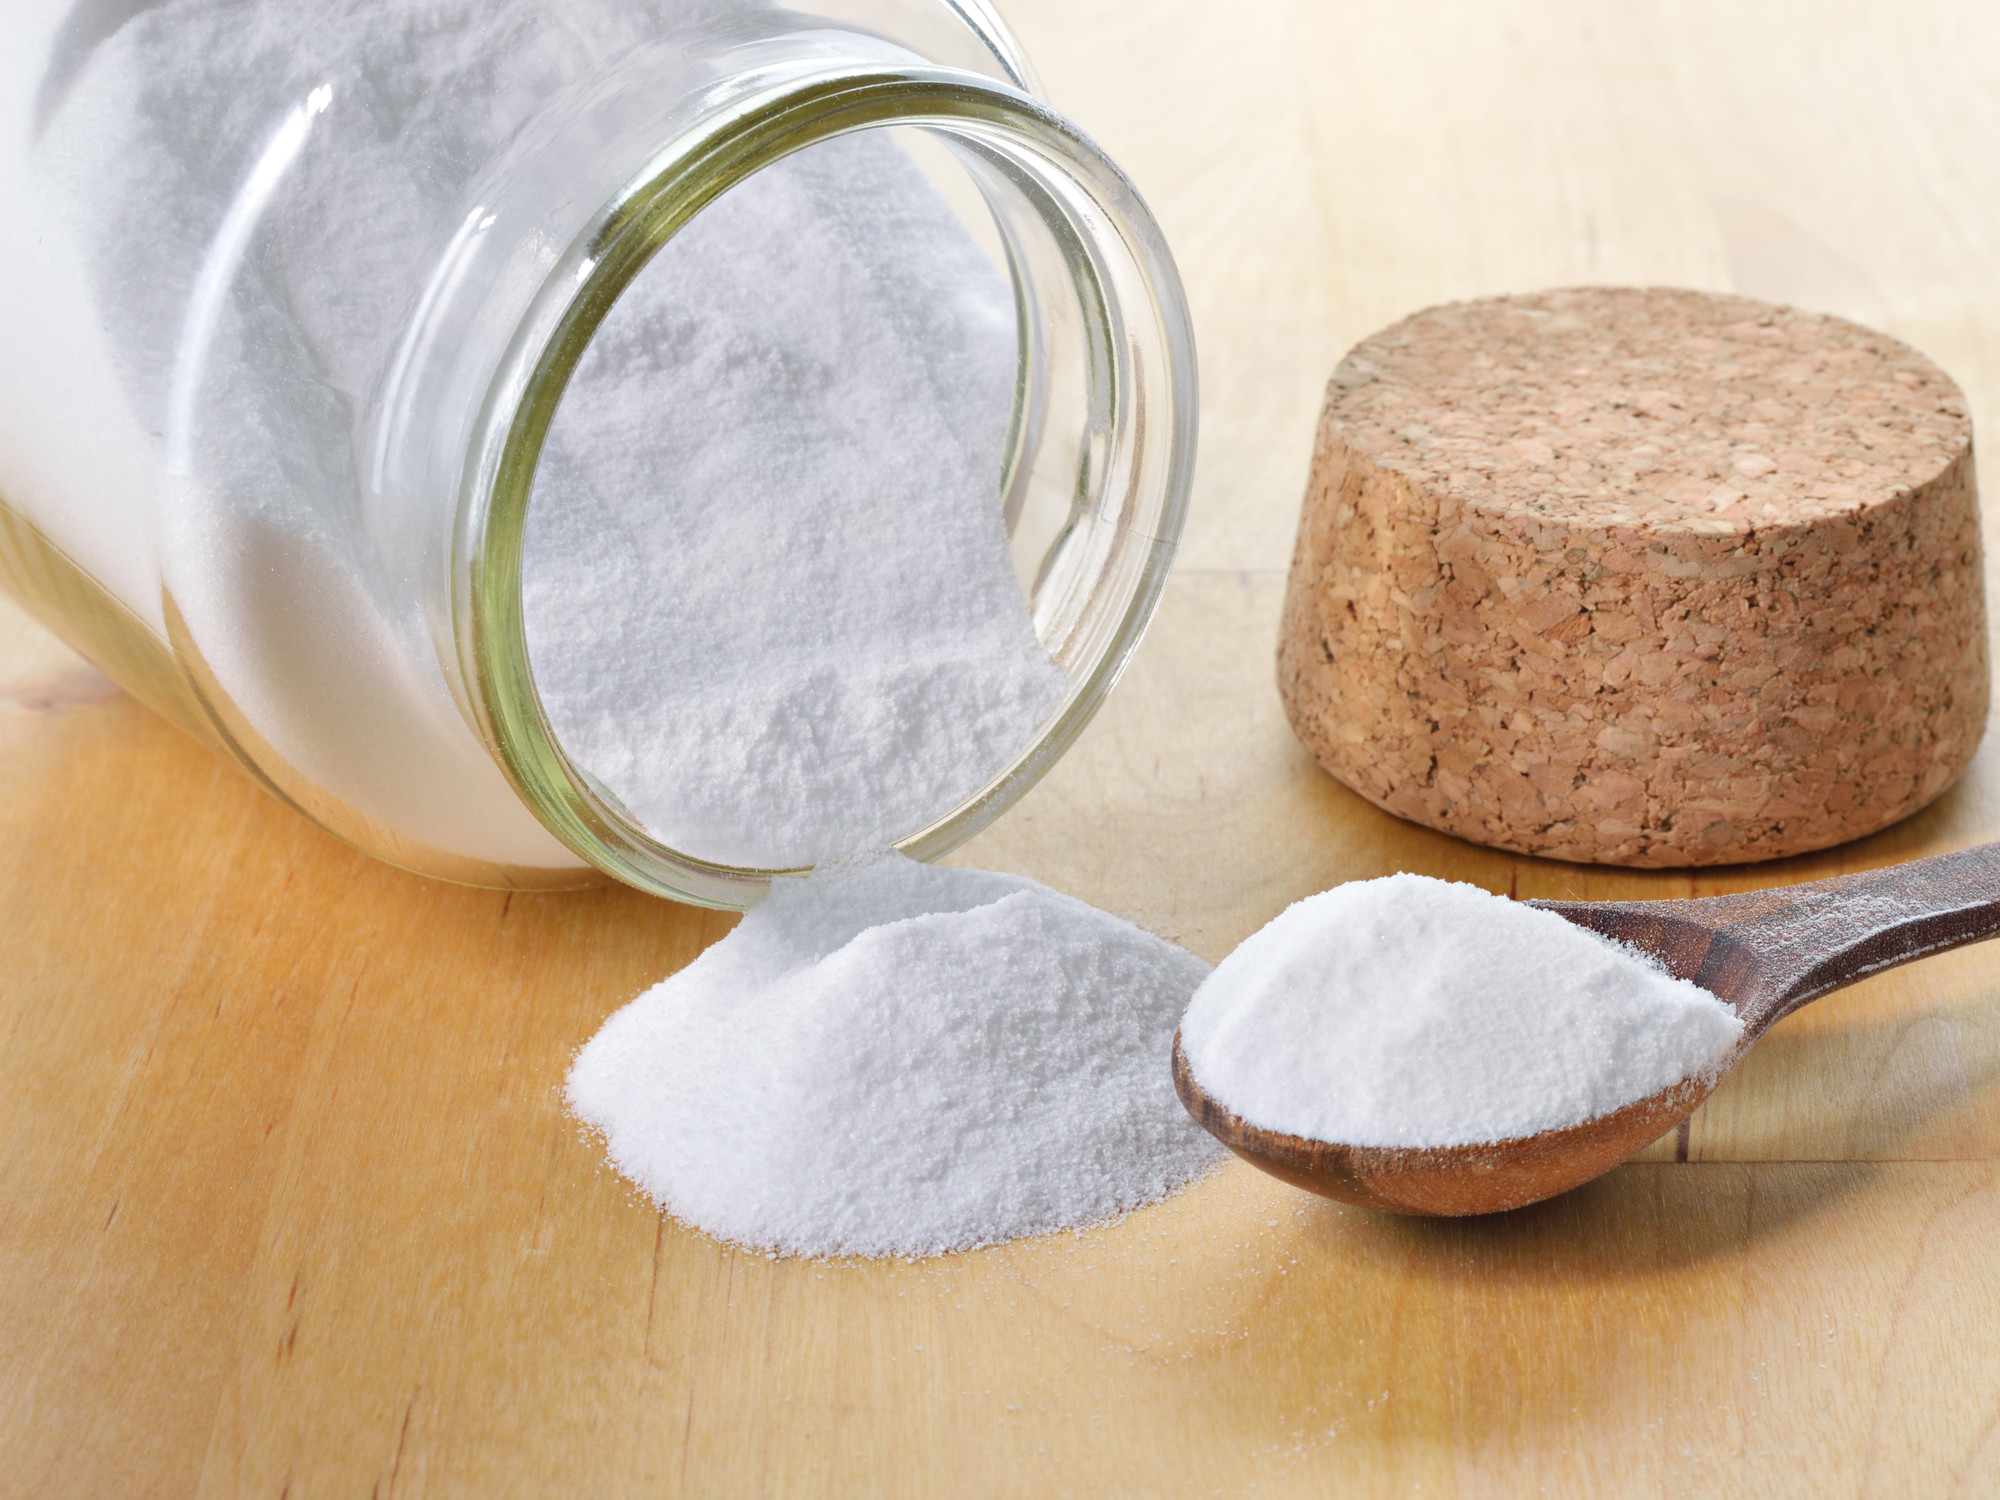 10 baking soda uses for health, house and hygiene